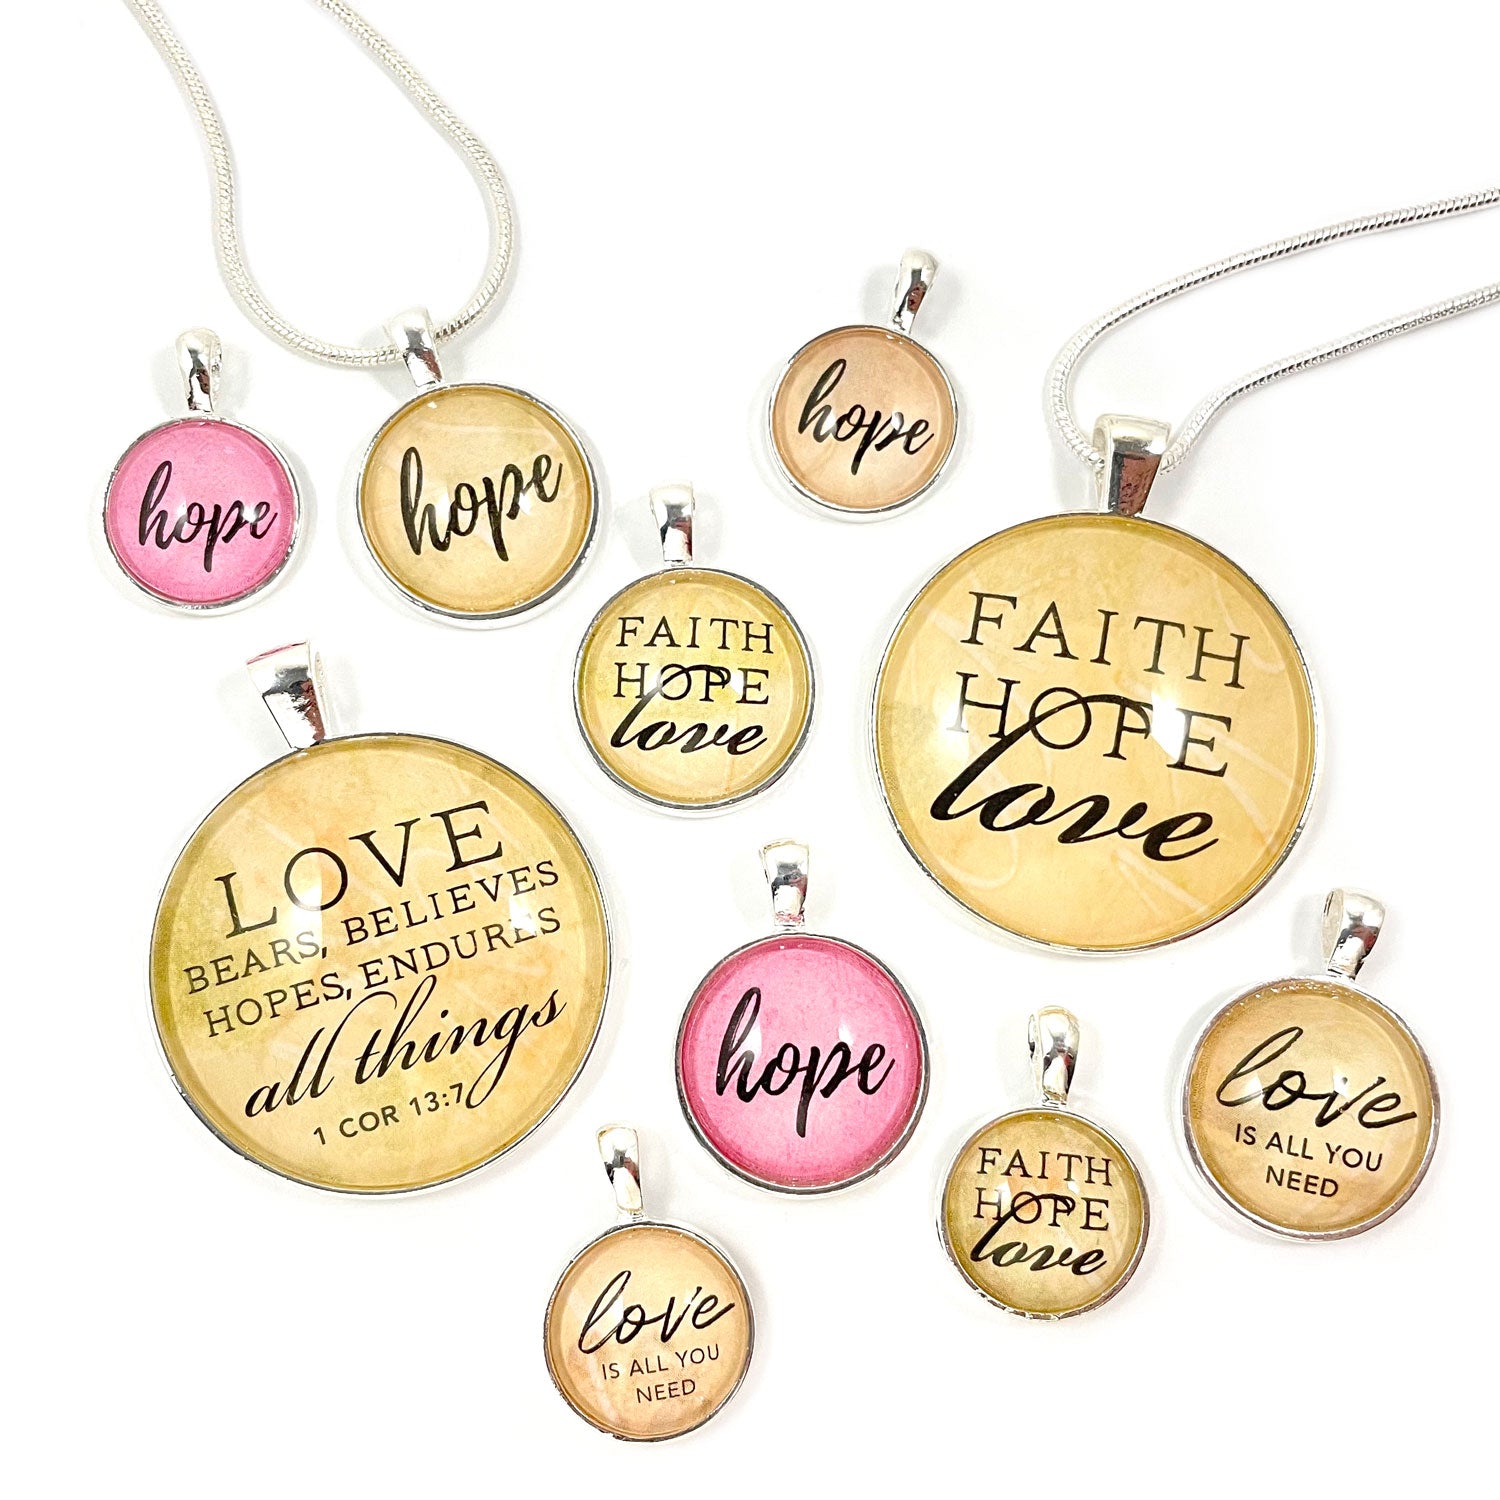 All Necklaces - Page 1 - Love And Hope Jewelry